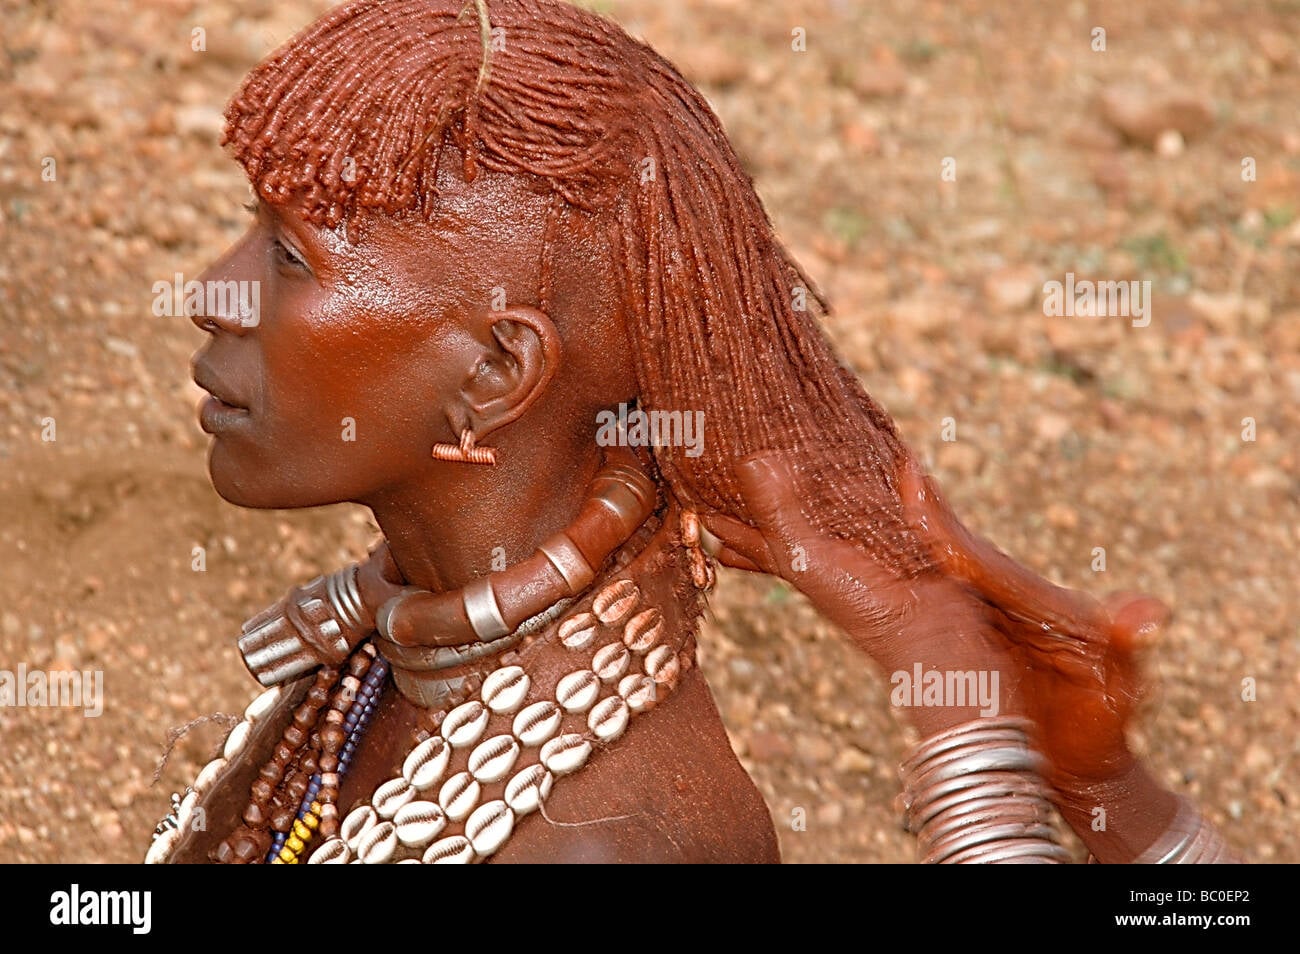 hairstyles-from-different-african-tribes-v0-28yqhpued5bd1.jpg